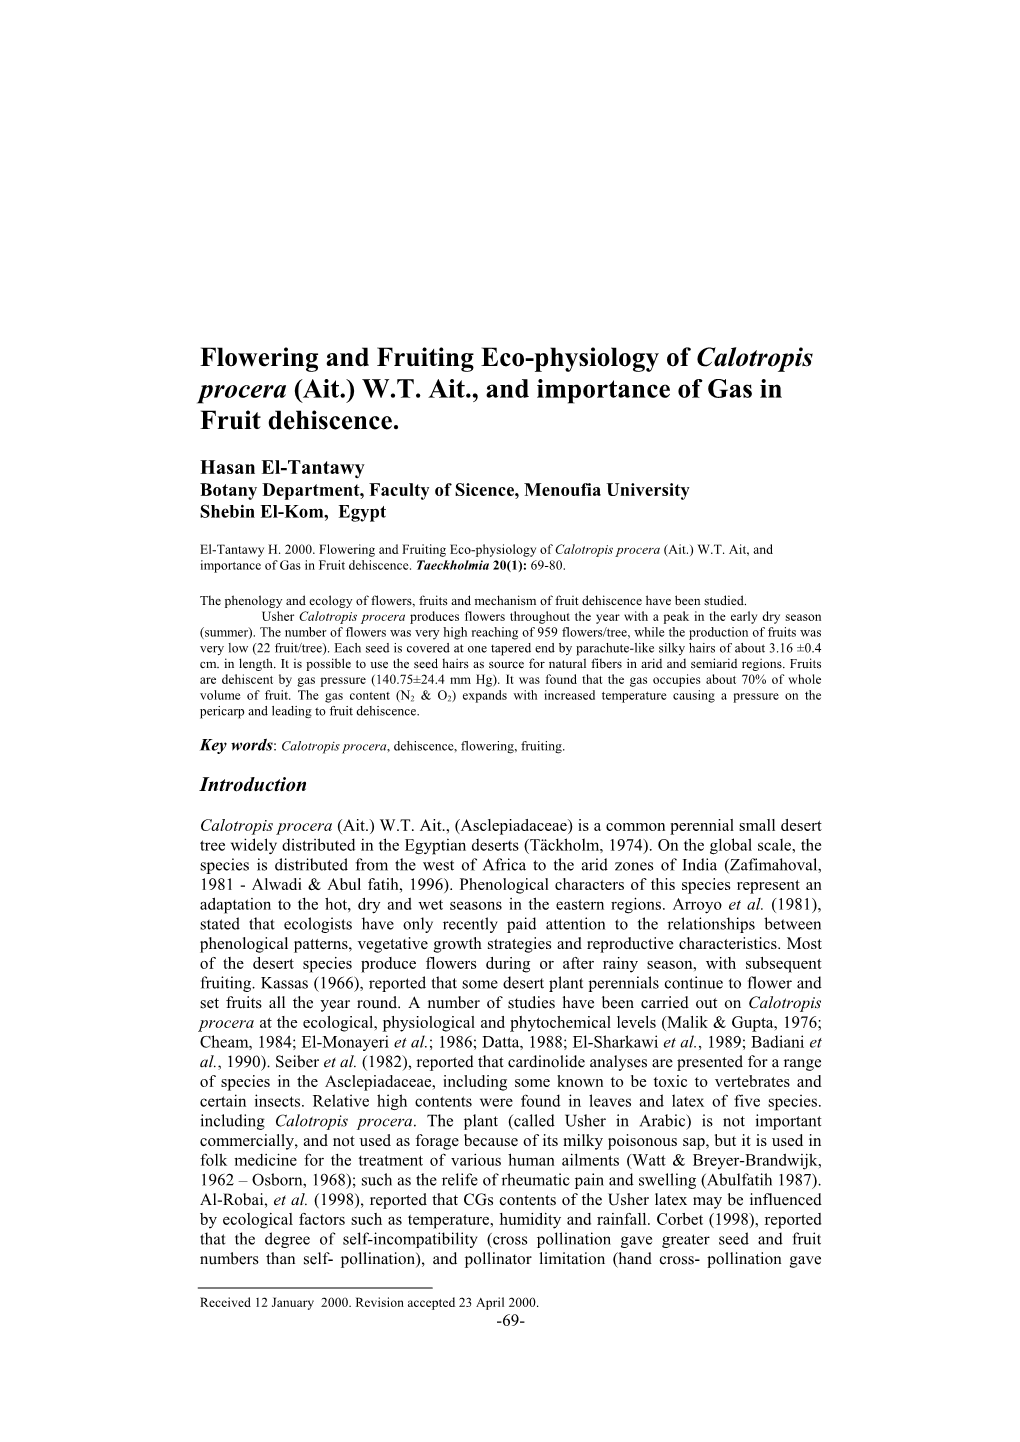 Flowering and Fruiting Eco-Physiology of Calotropis Procera (Ait.) W.T